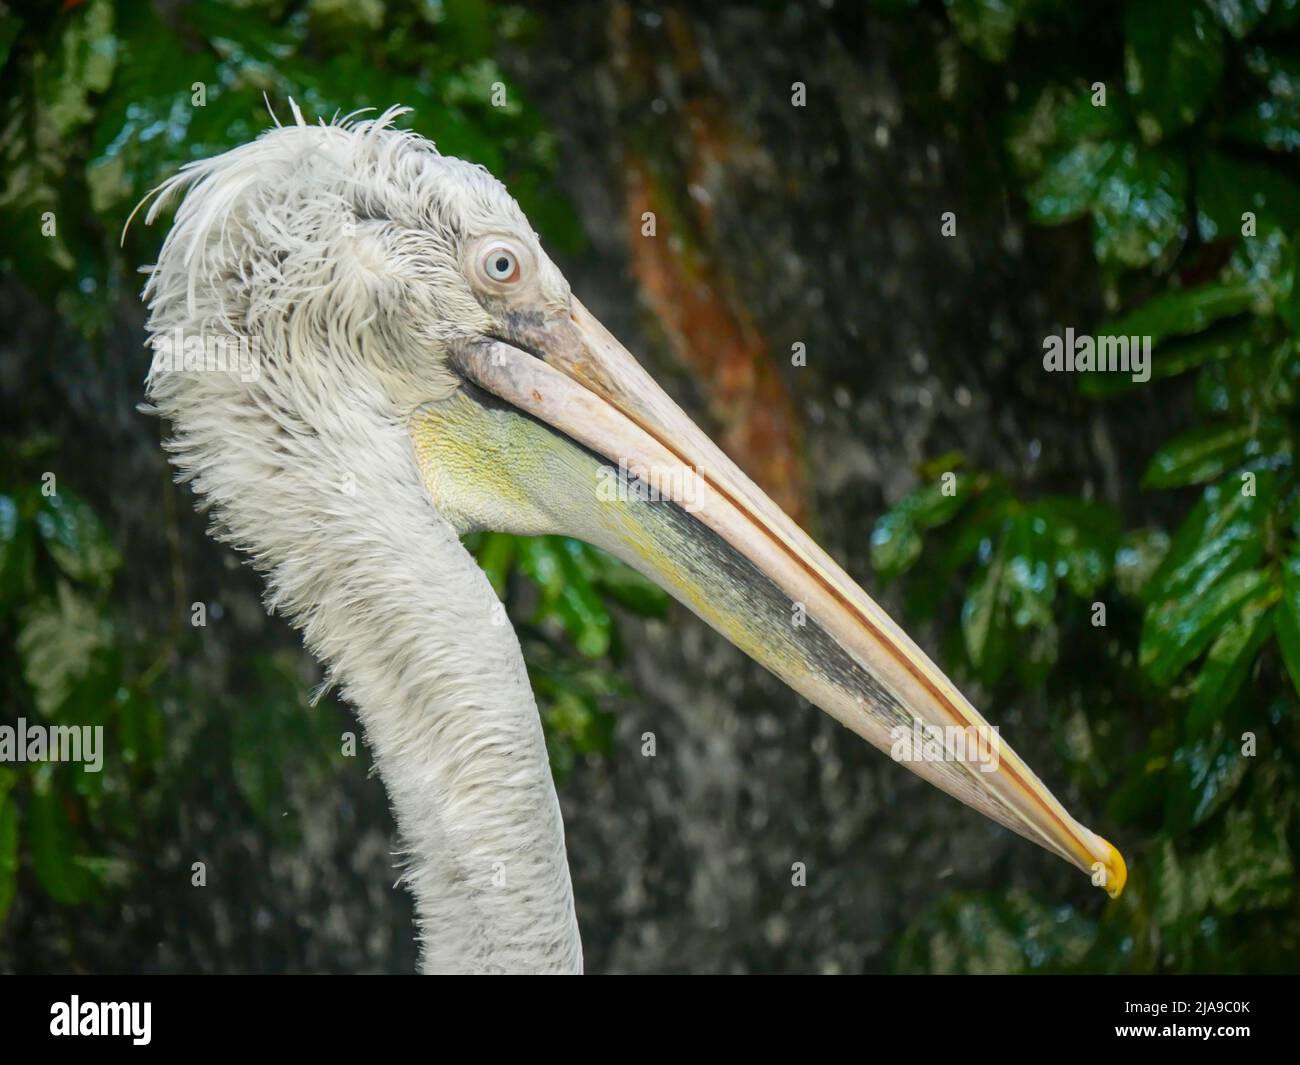 Pelican, Big water birds close up picture. pelicans are characterized by a long beak and a large throat pouch. Stock Photo